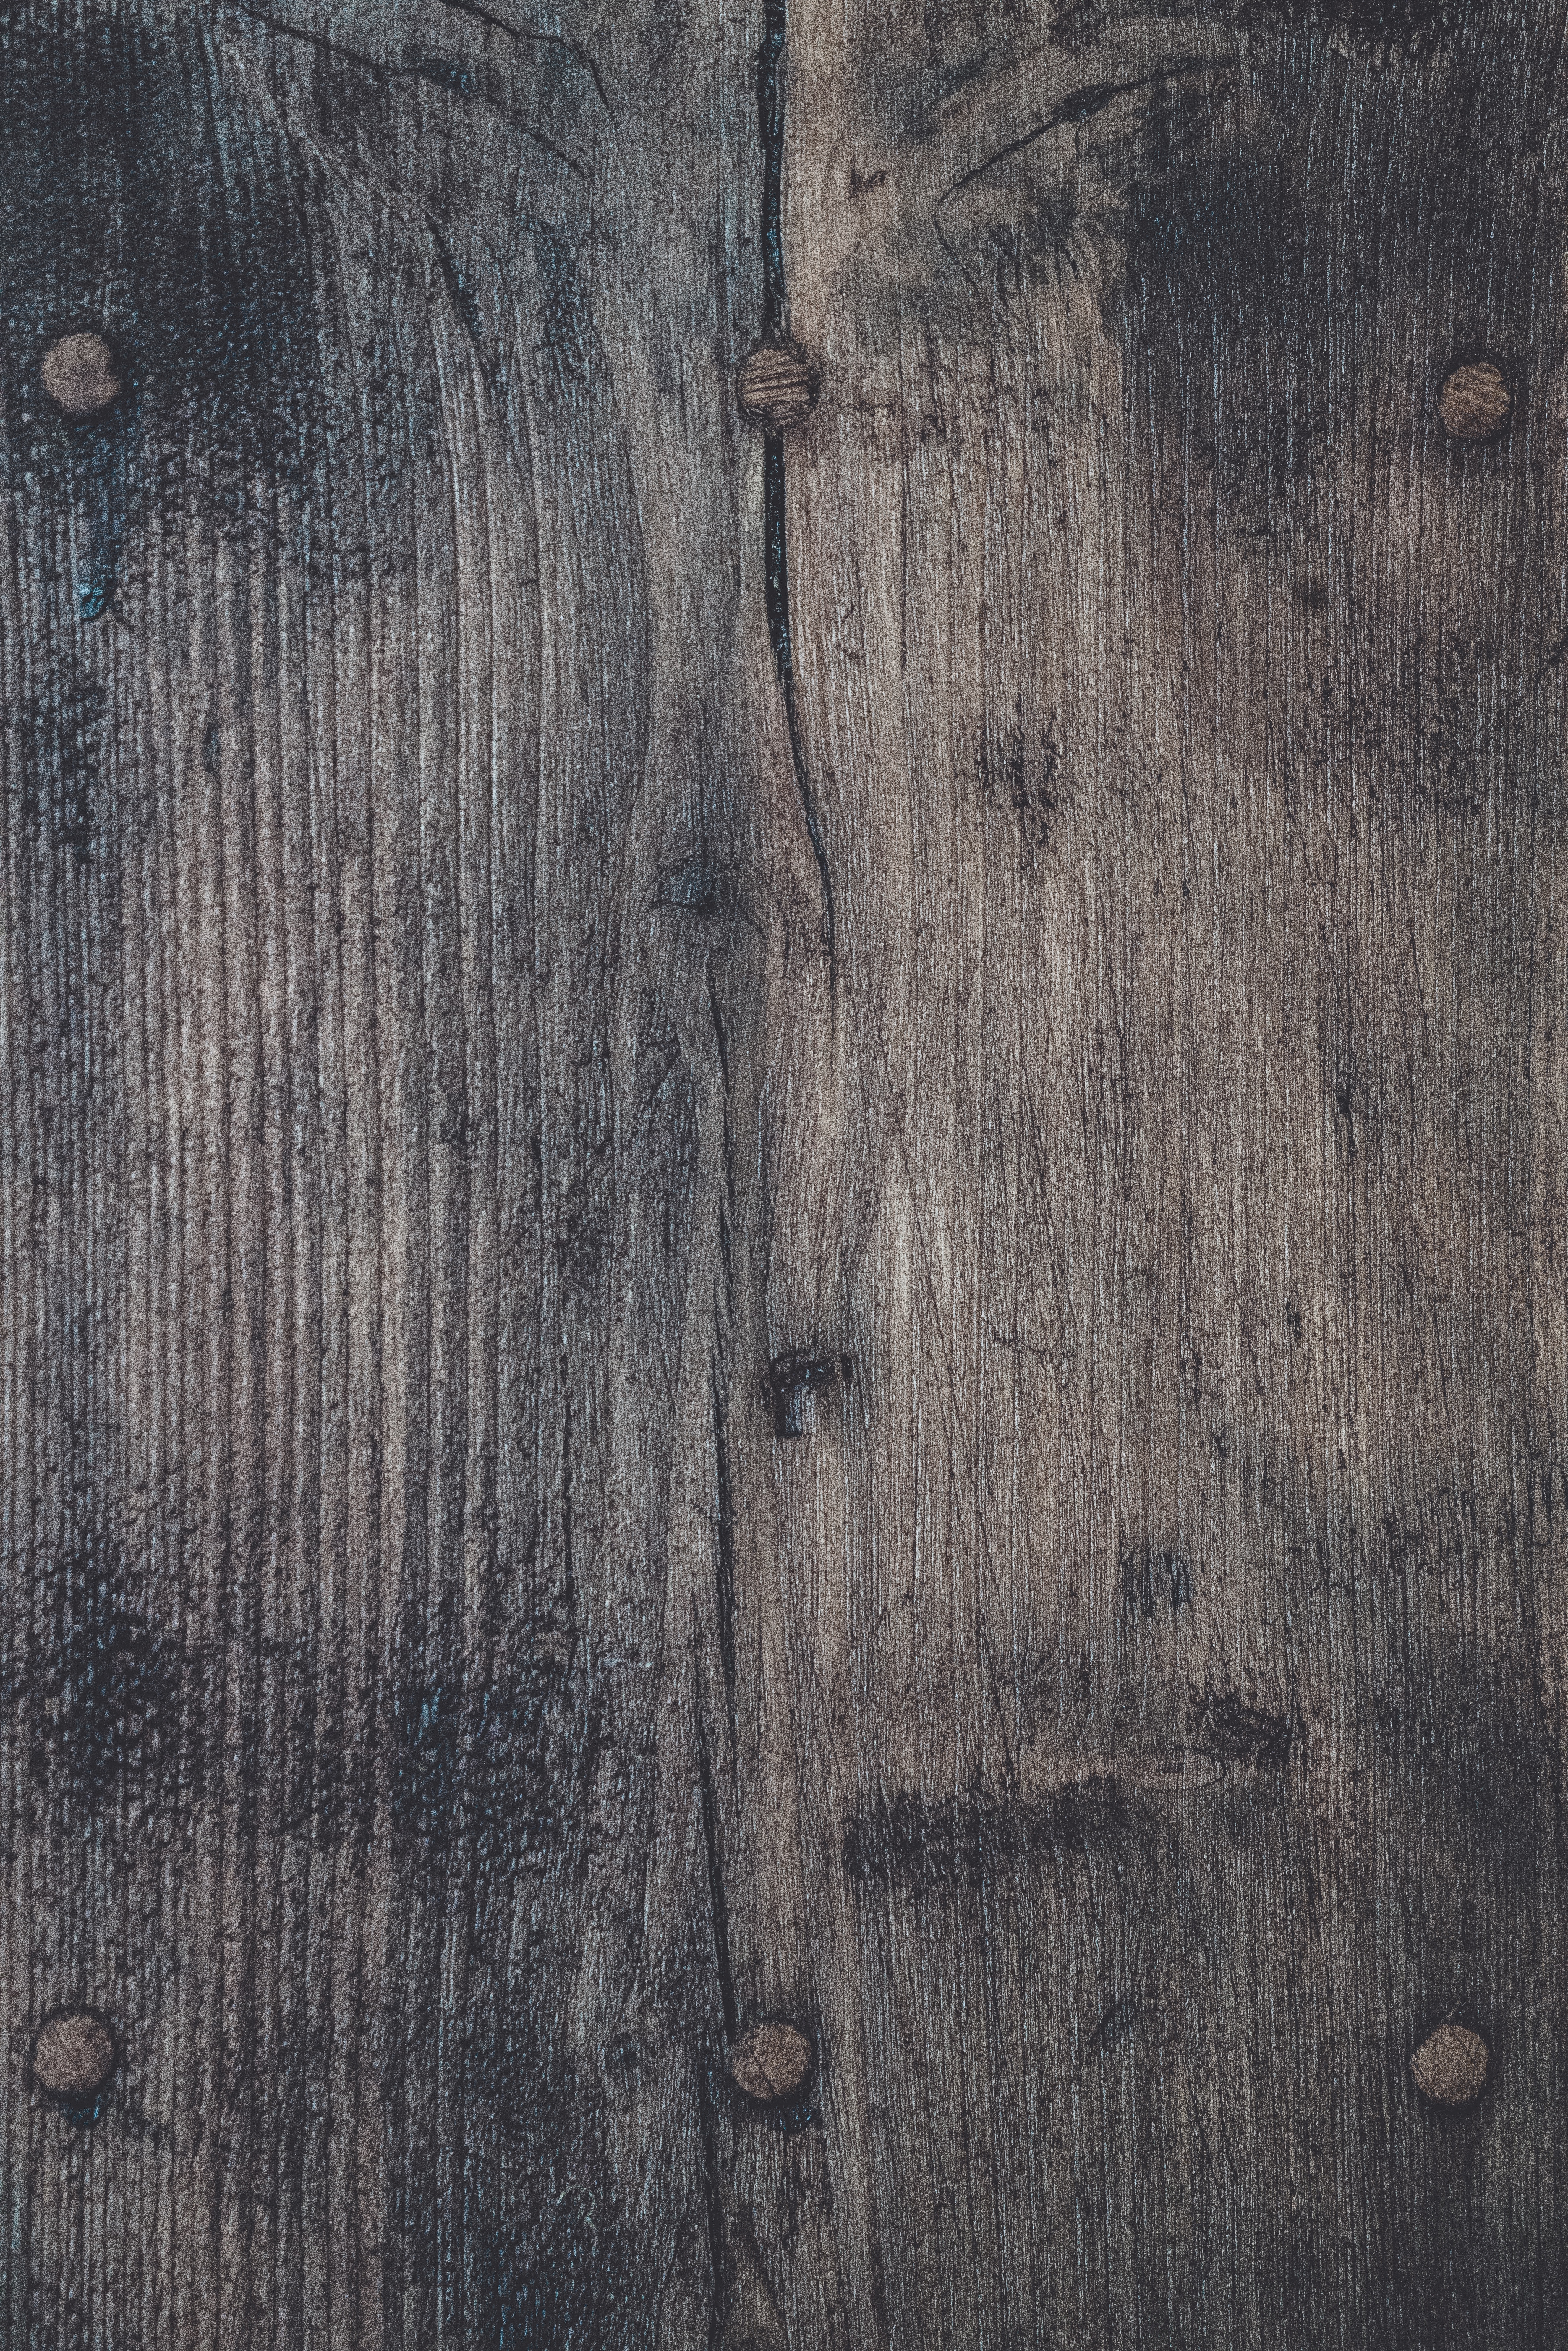 texture, ribbed, textures, surface, wood, wooden lock screen backgrounds